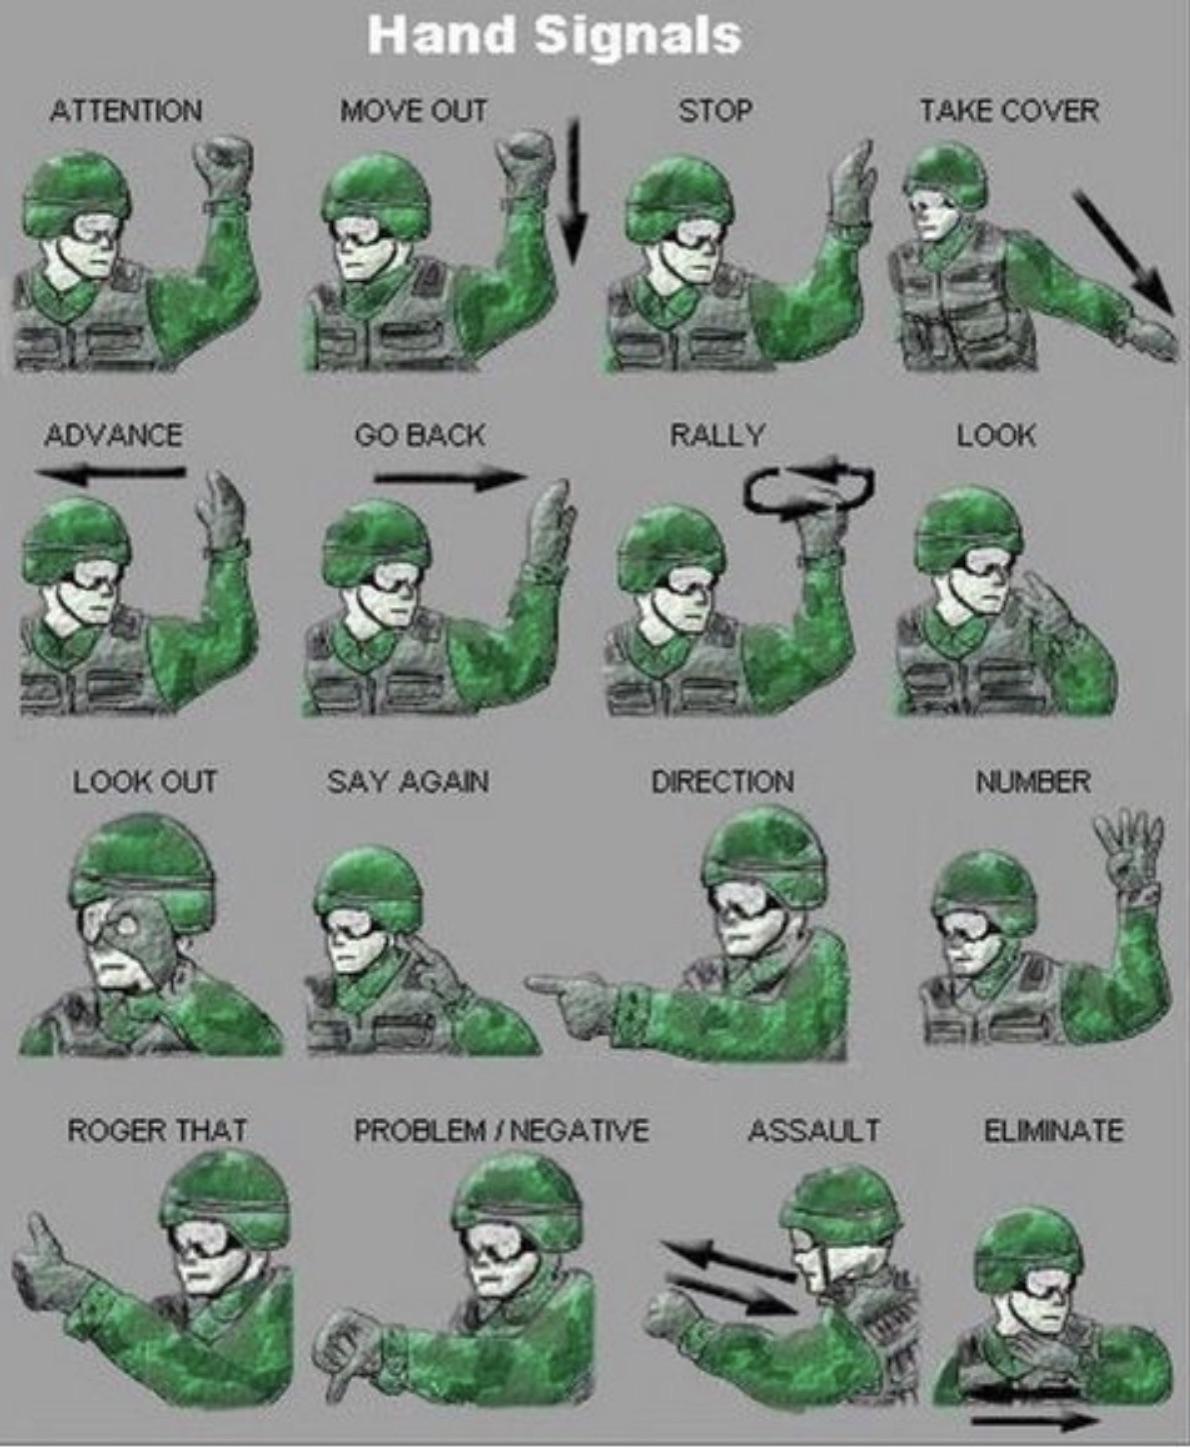 military hand signals - Hand Signals Move Out Stop Attention Take Cover Advance Go Back Rally Look Look Out Say Again Direction Number Roger That ProblemNegative Assault Eliminate